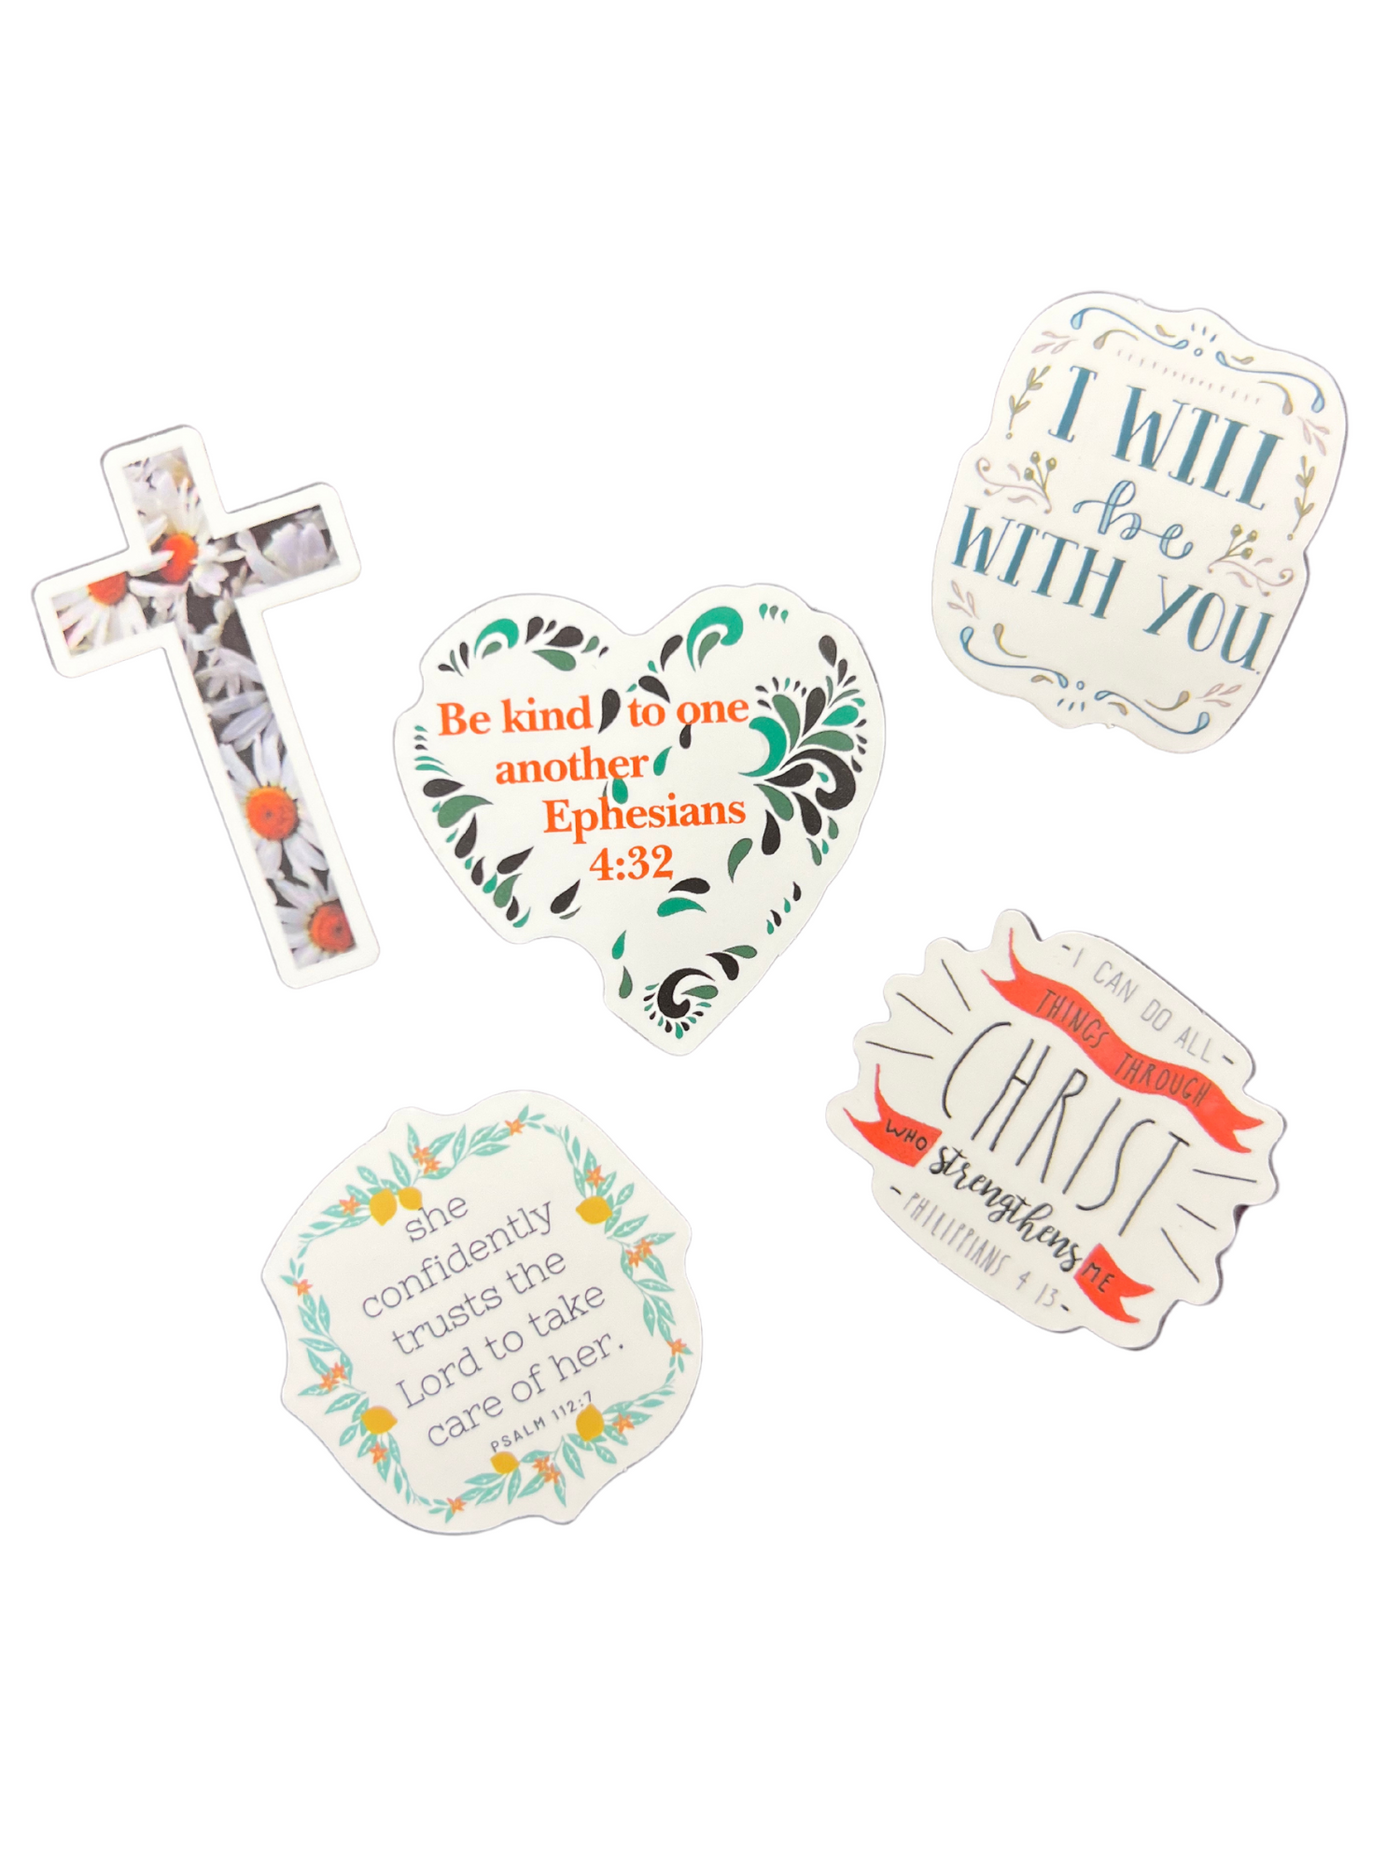 Set of 5 Christian Stickers in teal/coral on white background.